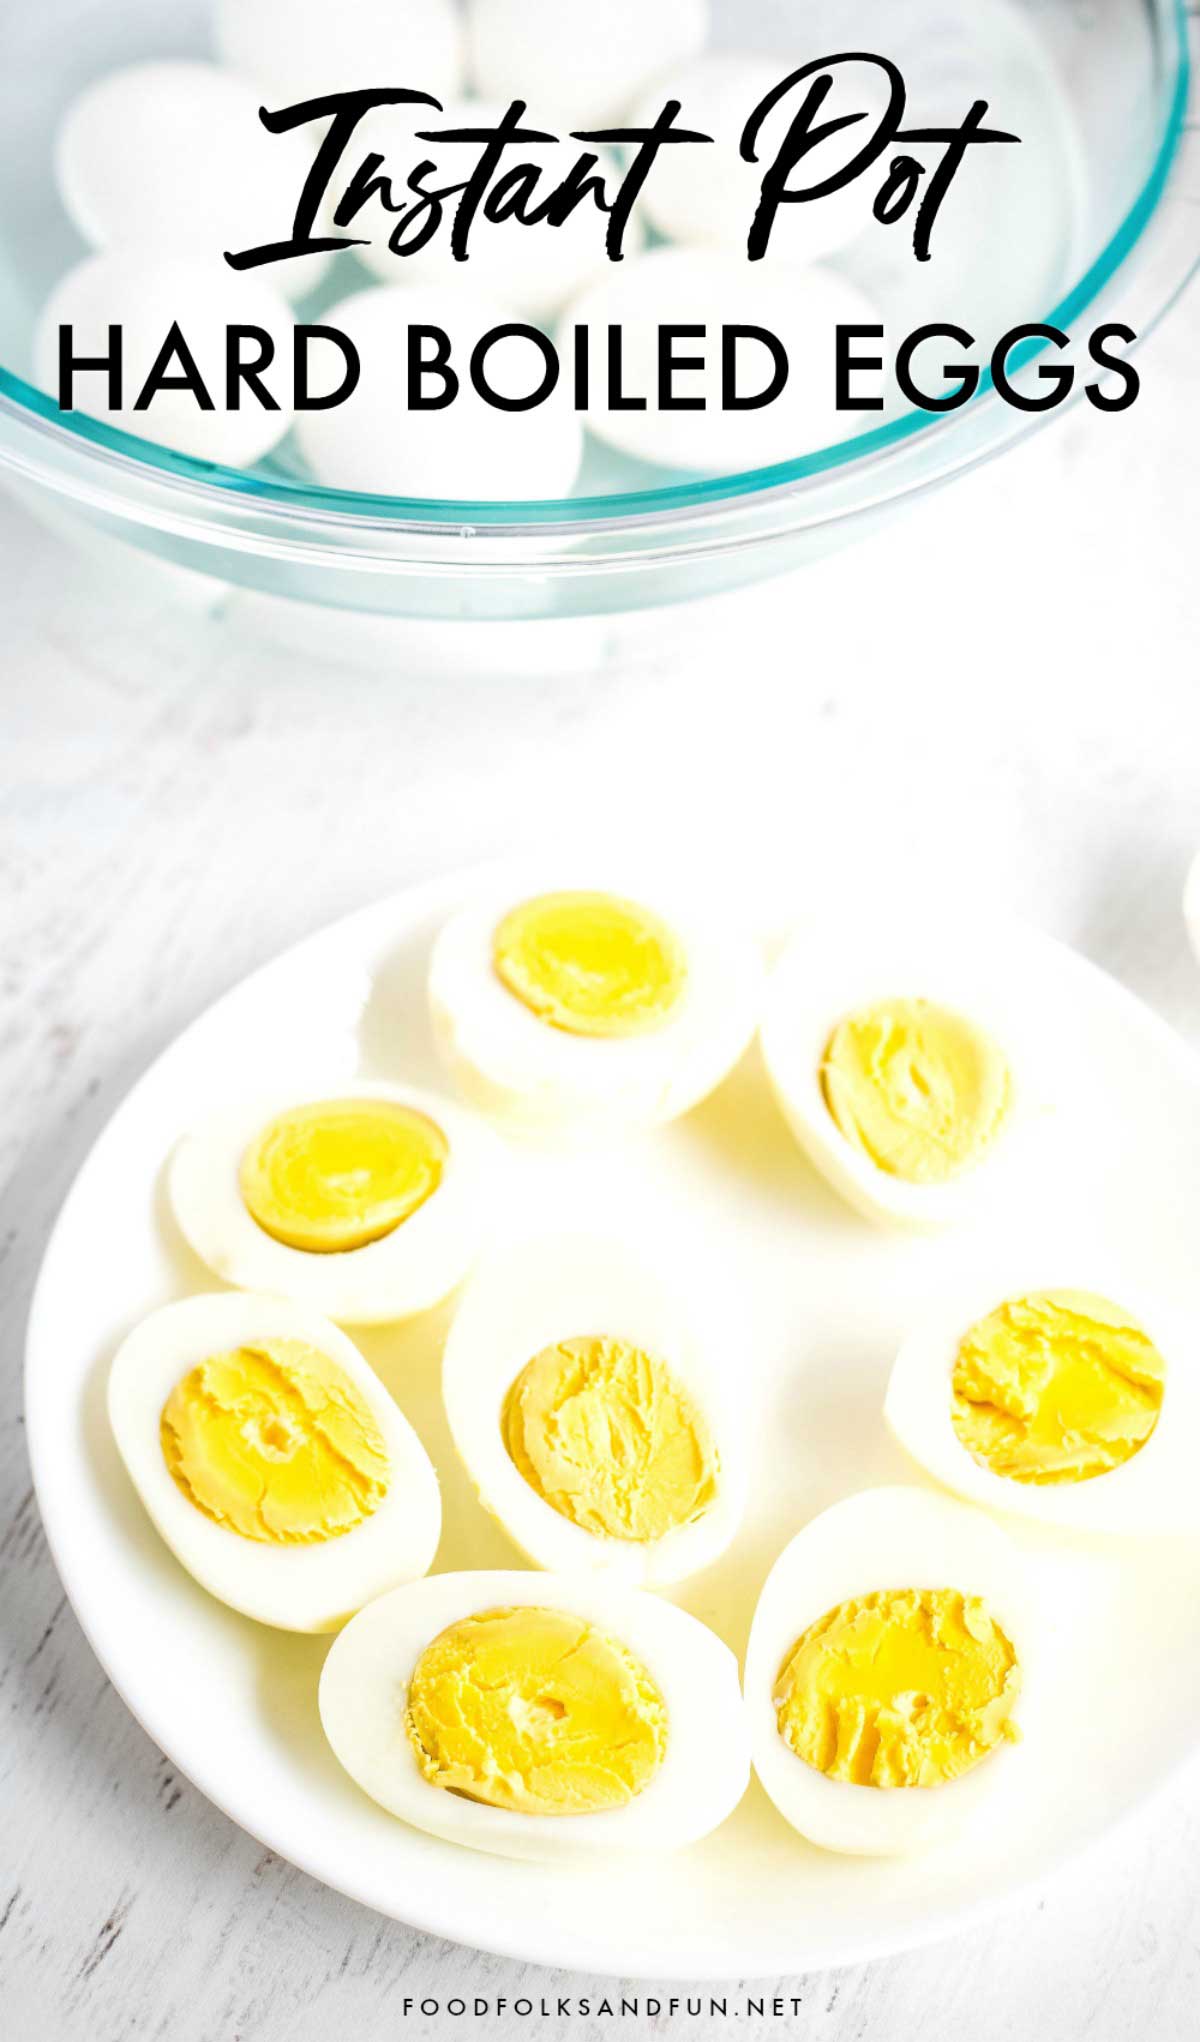 A close-up of hard-boiled eggs on a plate